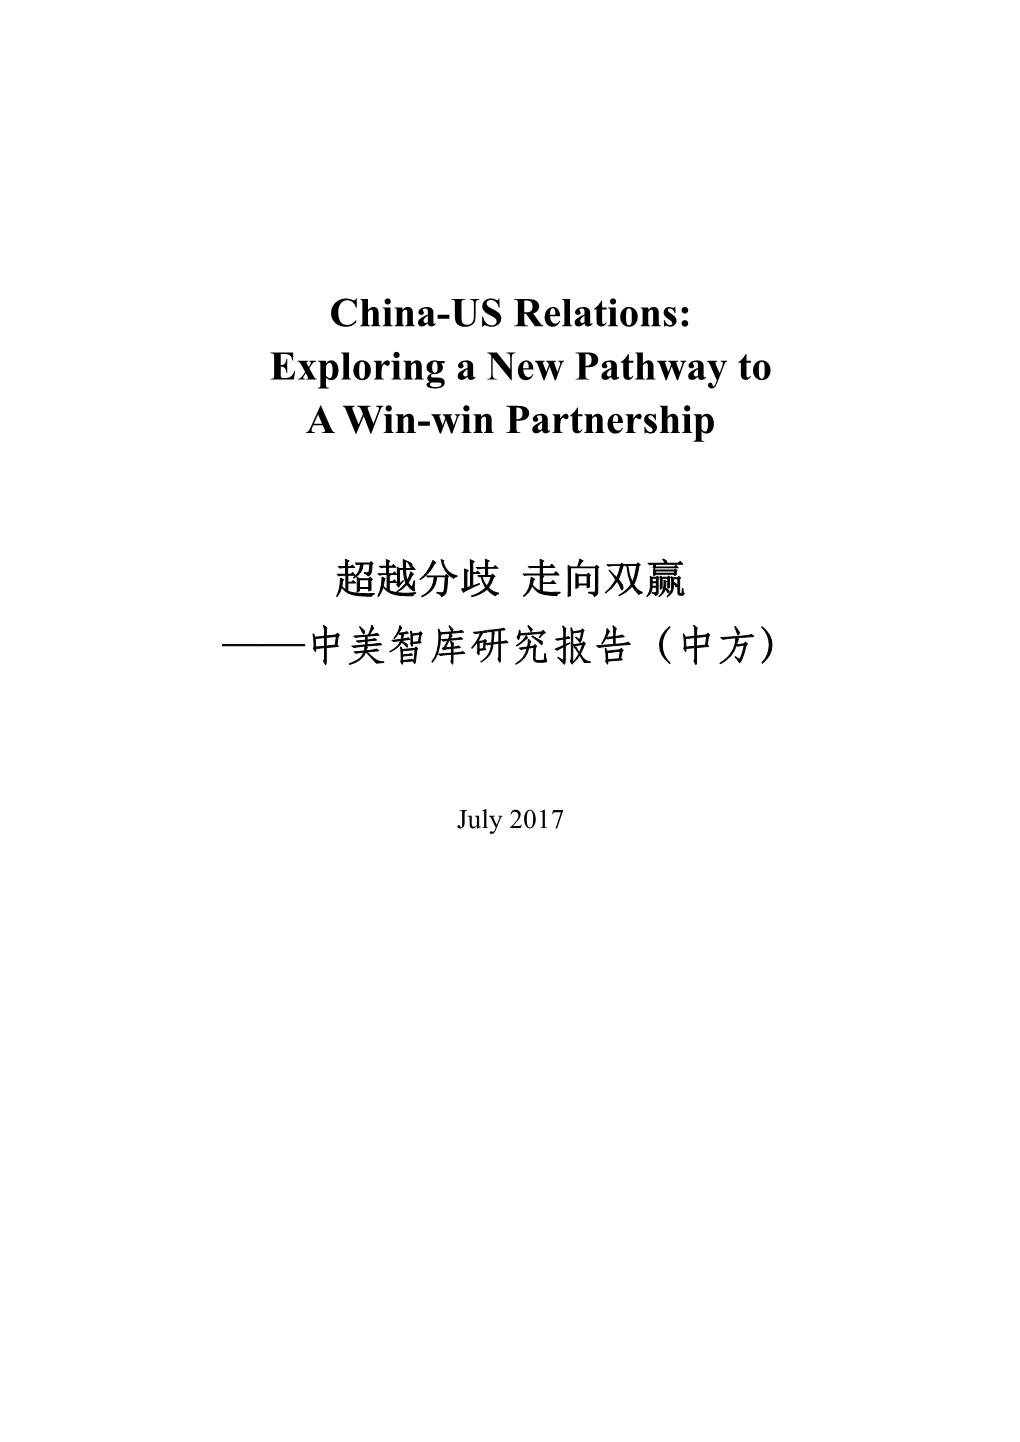 China-US Relations: Exploring a New Pathway to a Win-Win Partnership